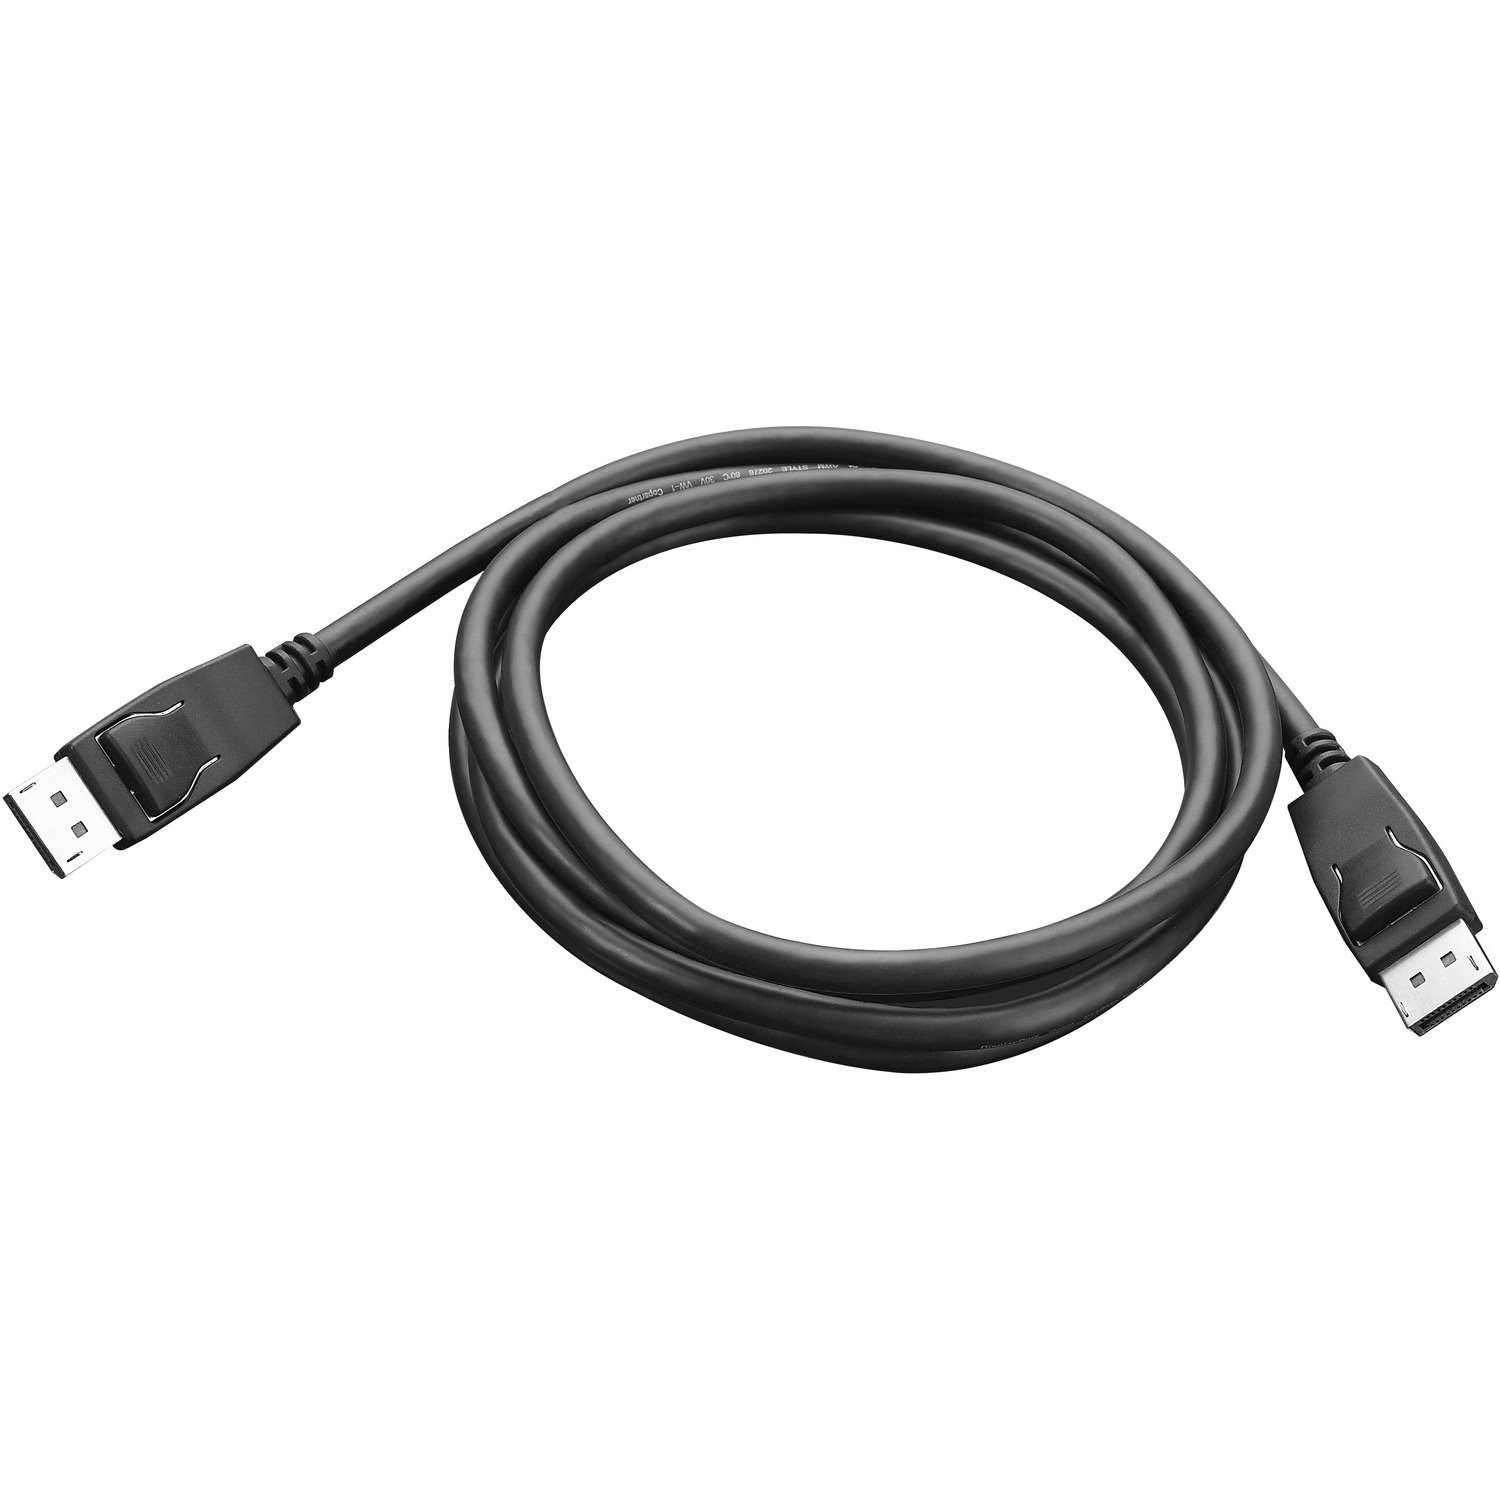 Lenovo 1.80 m DisplayPort A/V Cable for Monitor, PC, TV